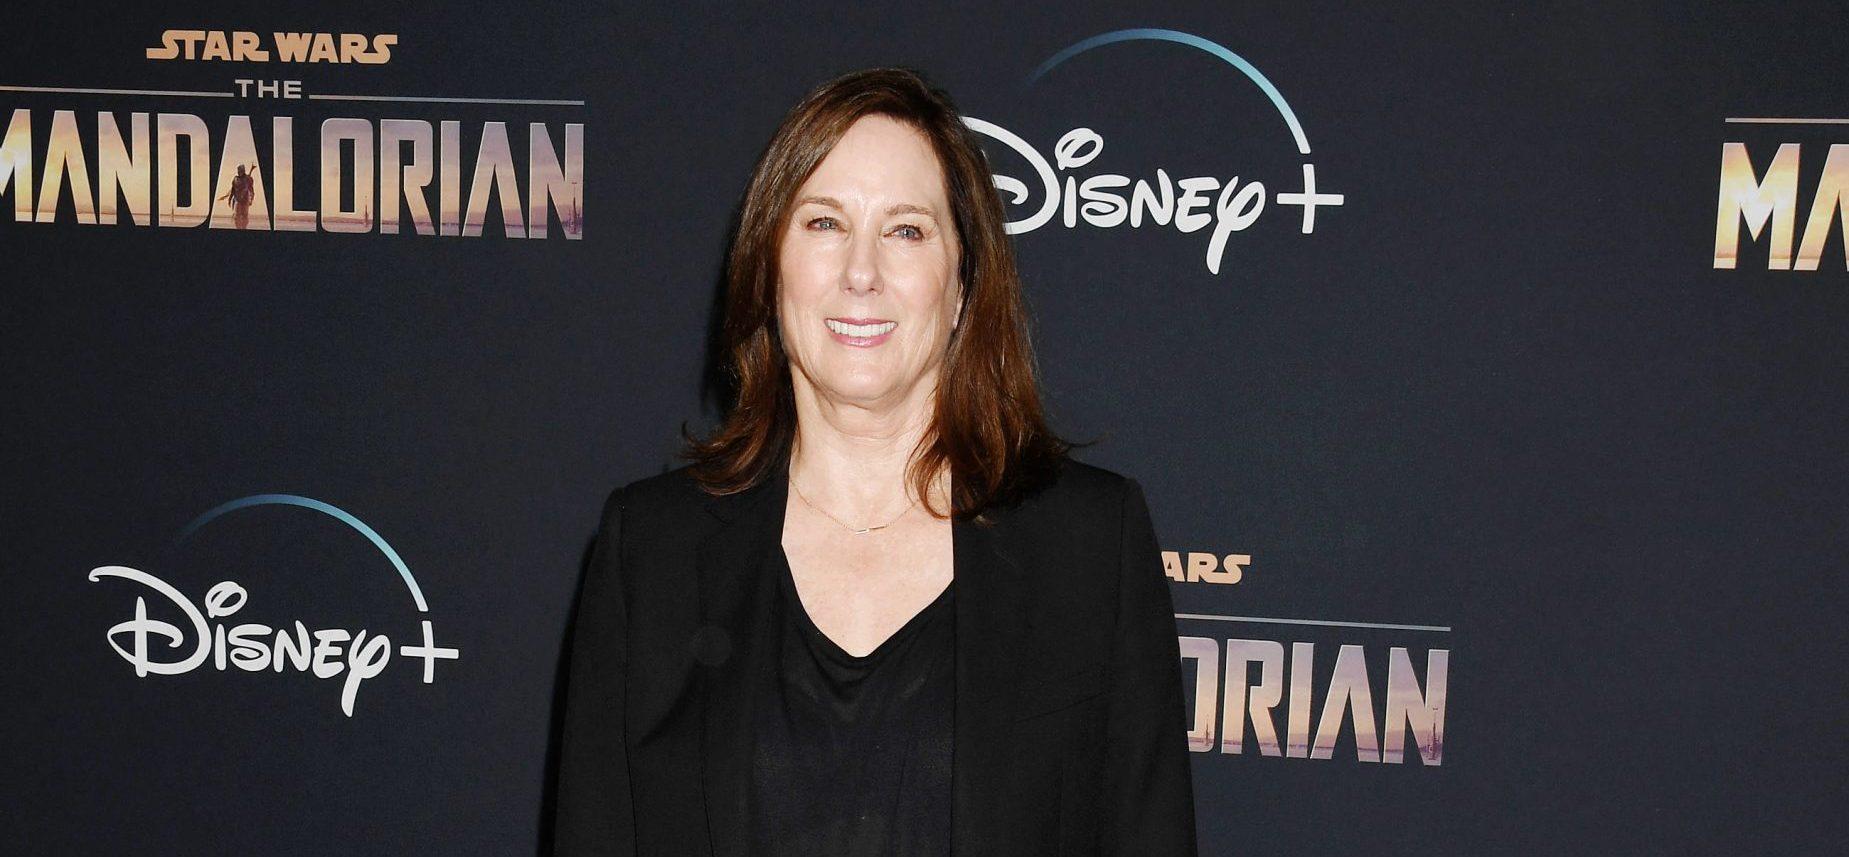 Kathleen Kennedy at the Premiere Of Disney+'s "The Mandalorian" - Arrivals